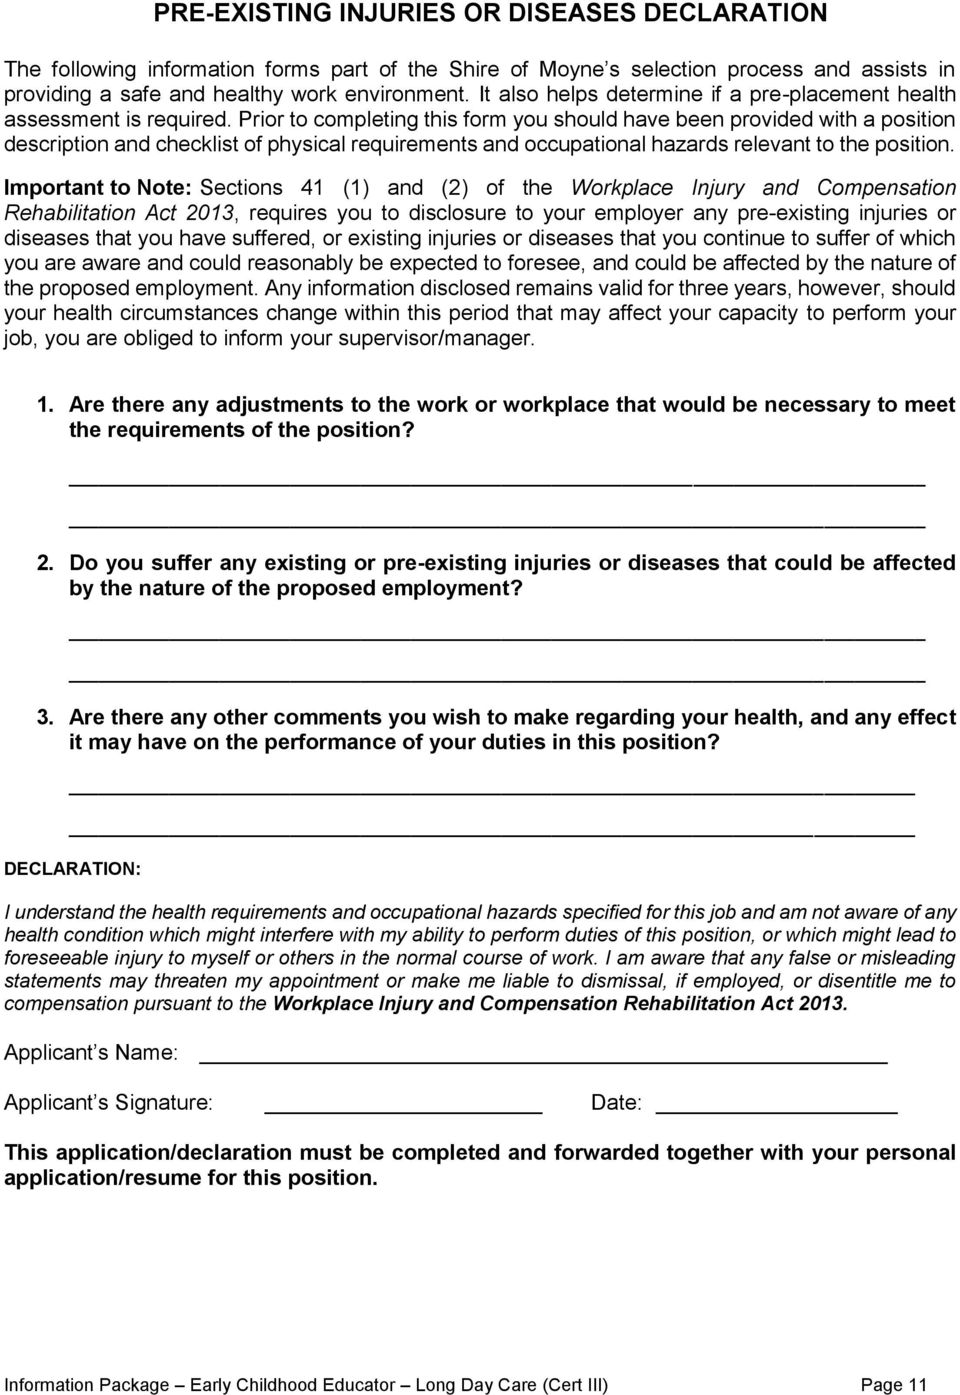 Prior to completing this form you should have been provided with a position description and checklist of physical requirements and occupational hazards relevant to the position.